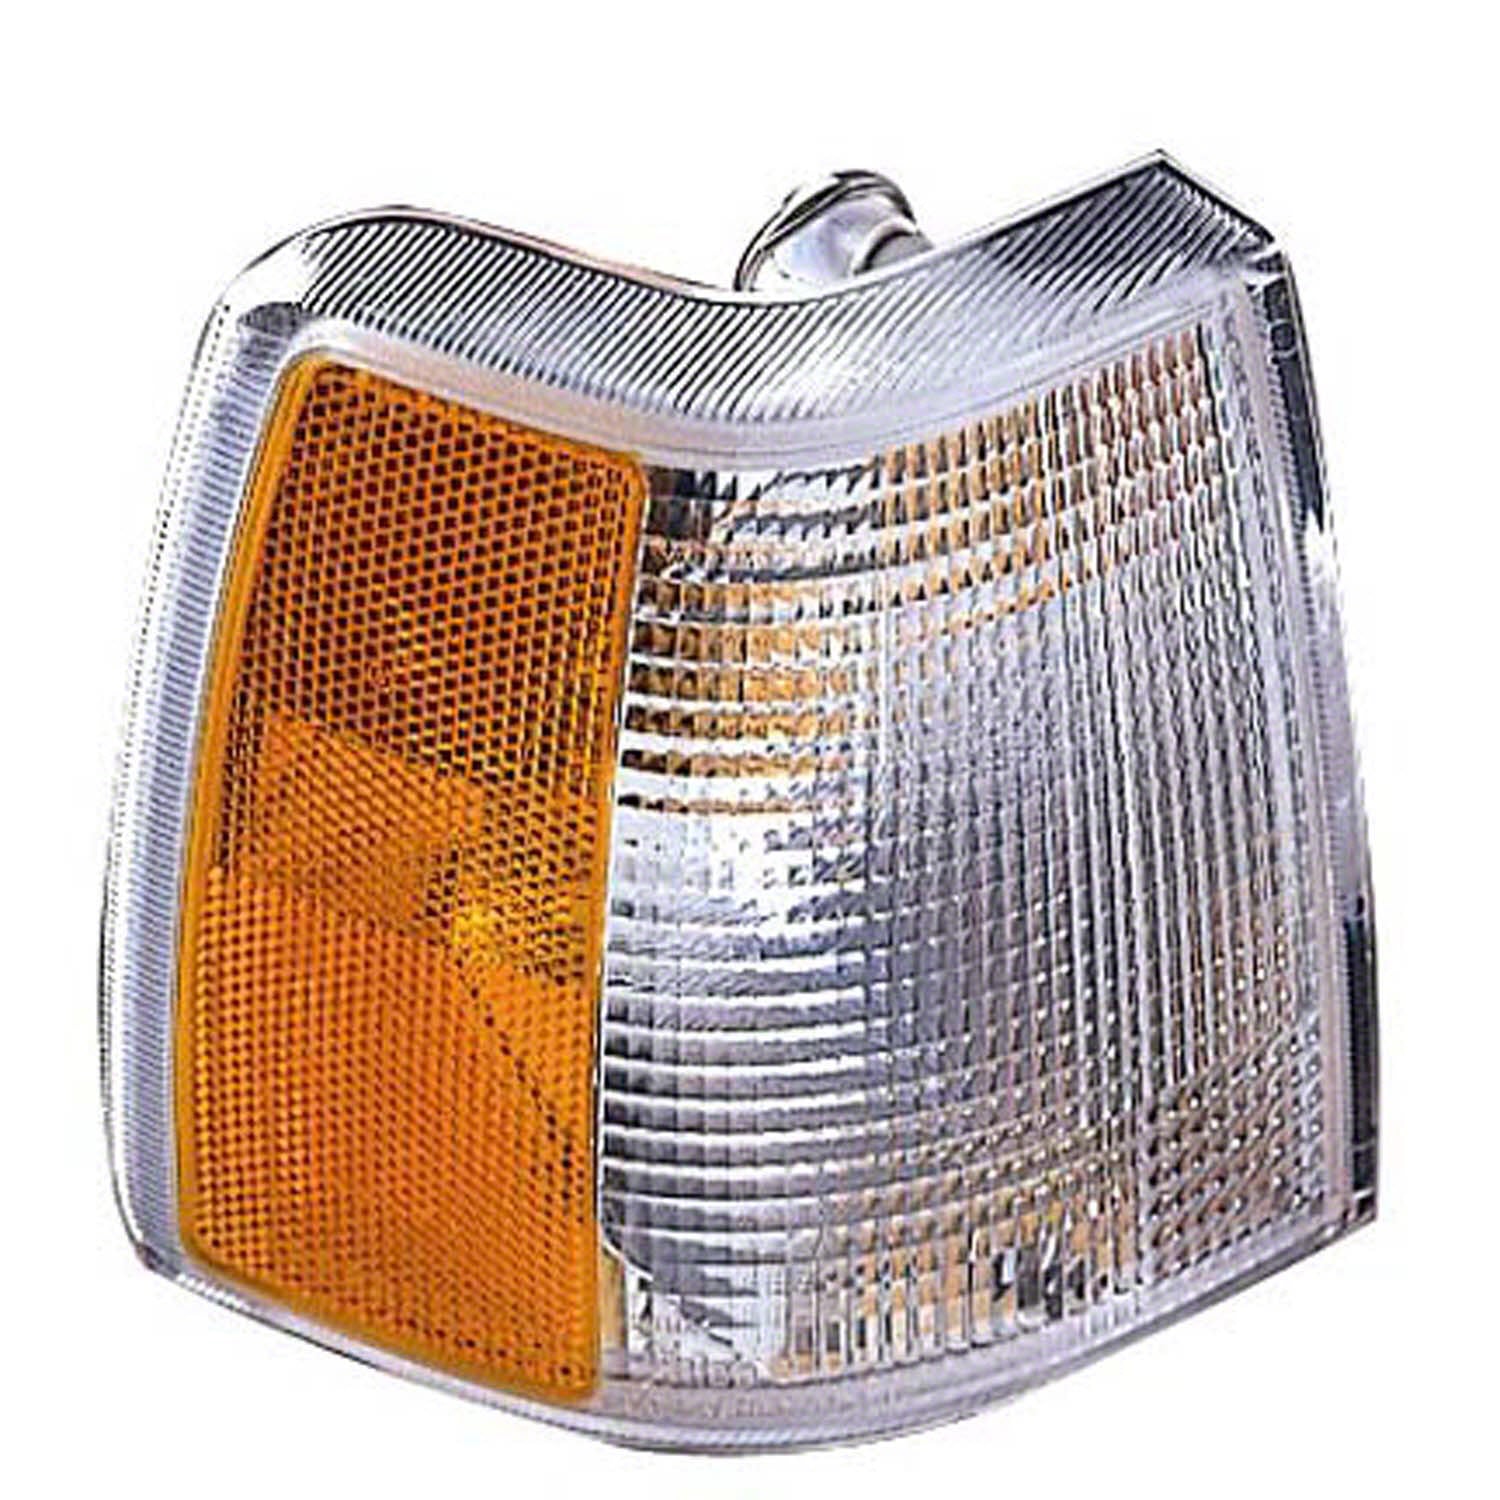 LT Front marker lamp assy for 1993-1997 VOLVO 850 fits VO2550103 / 68088343